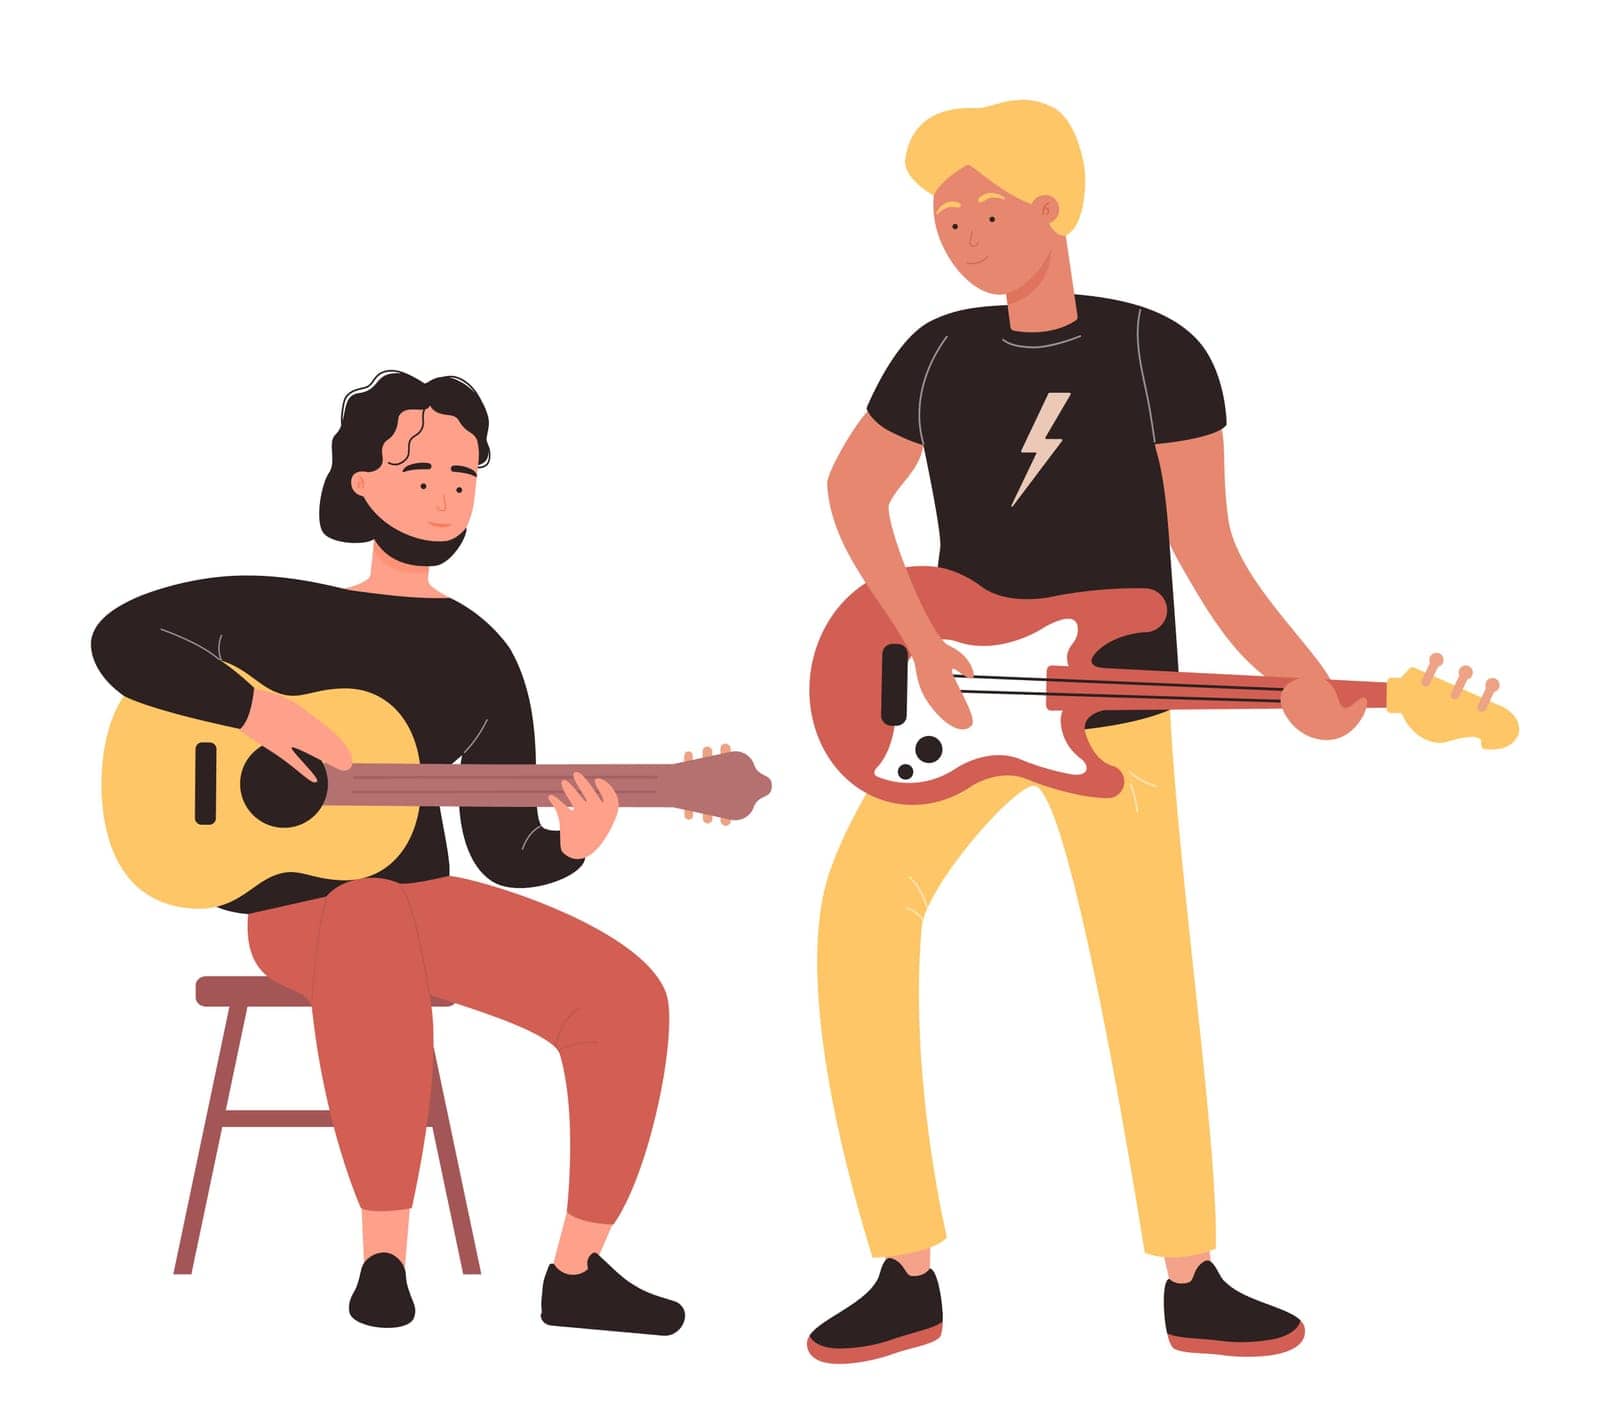 Musical band playing on guitar instrument. Leading guitarists artists strumming personal songs flat vector illustration